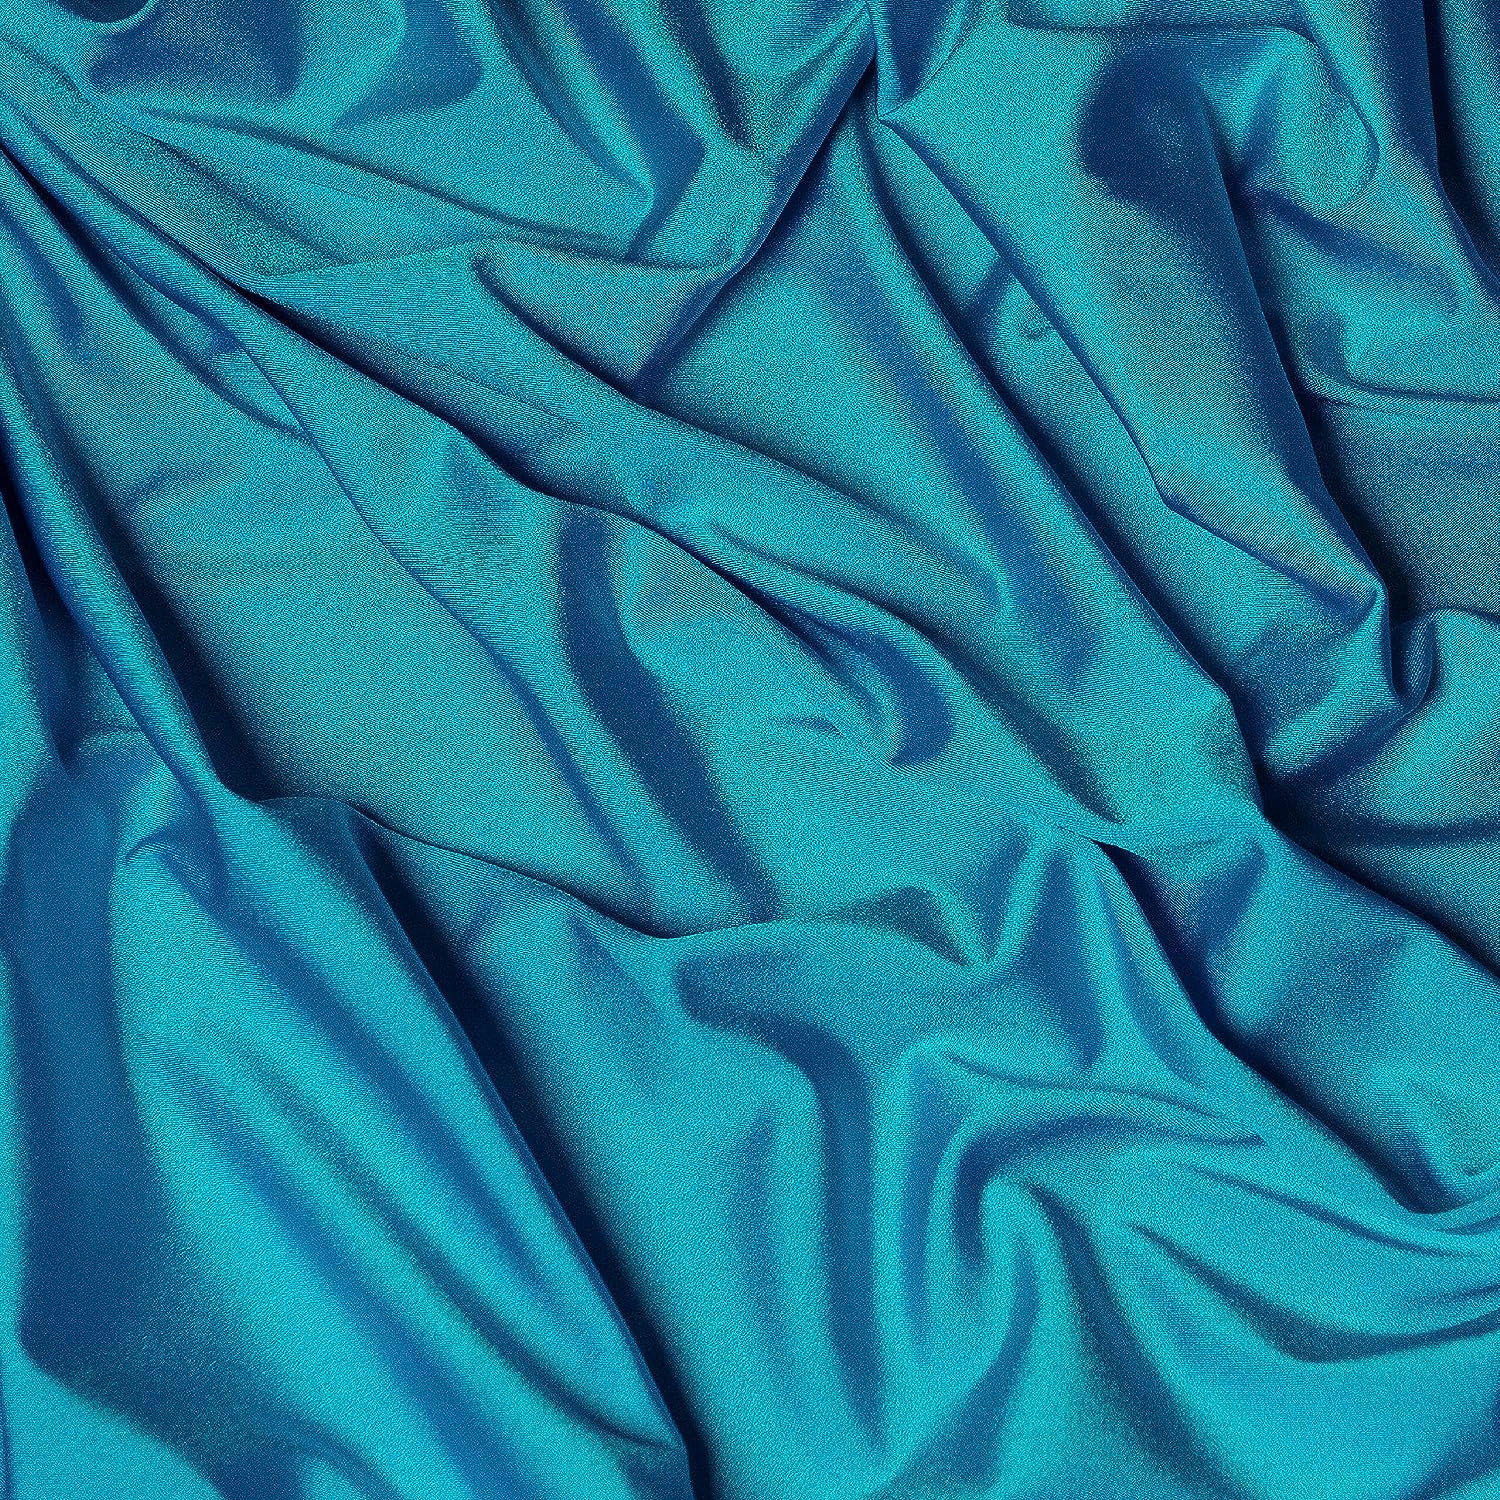 Turquoise Luxury Nylon Spandex Fabric By The YardICE FABRICSICE FABRICSBy The Yard (58" Width)Turquoise Luxury Nylon Spandex Fabric By The Yard ICE FABRICS